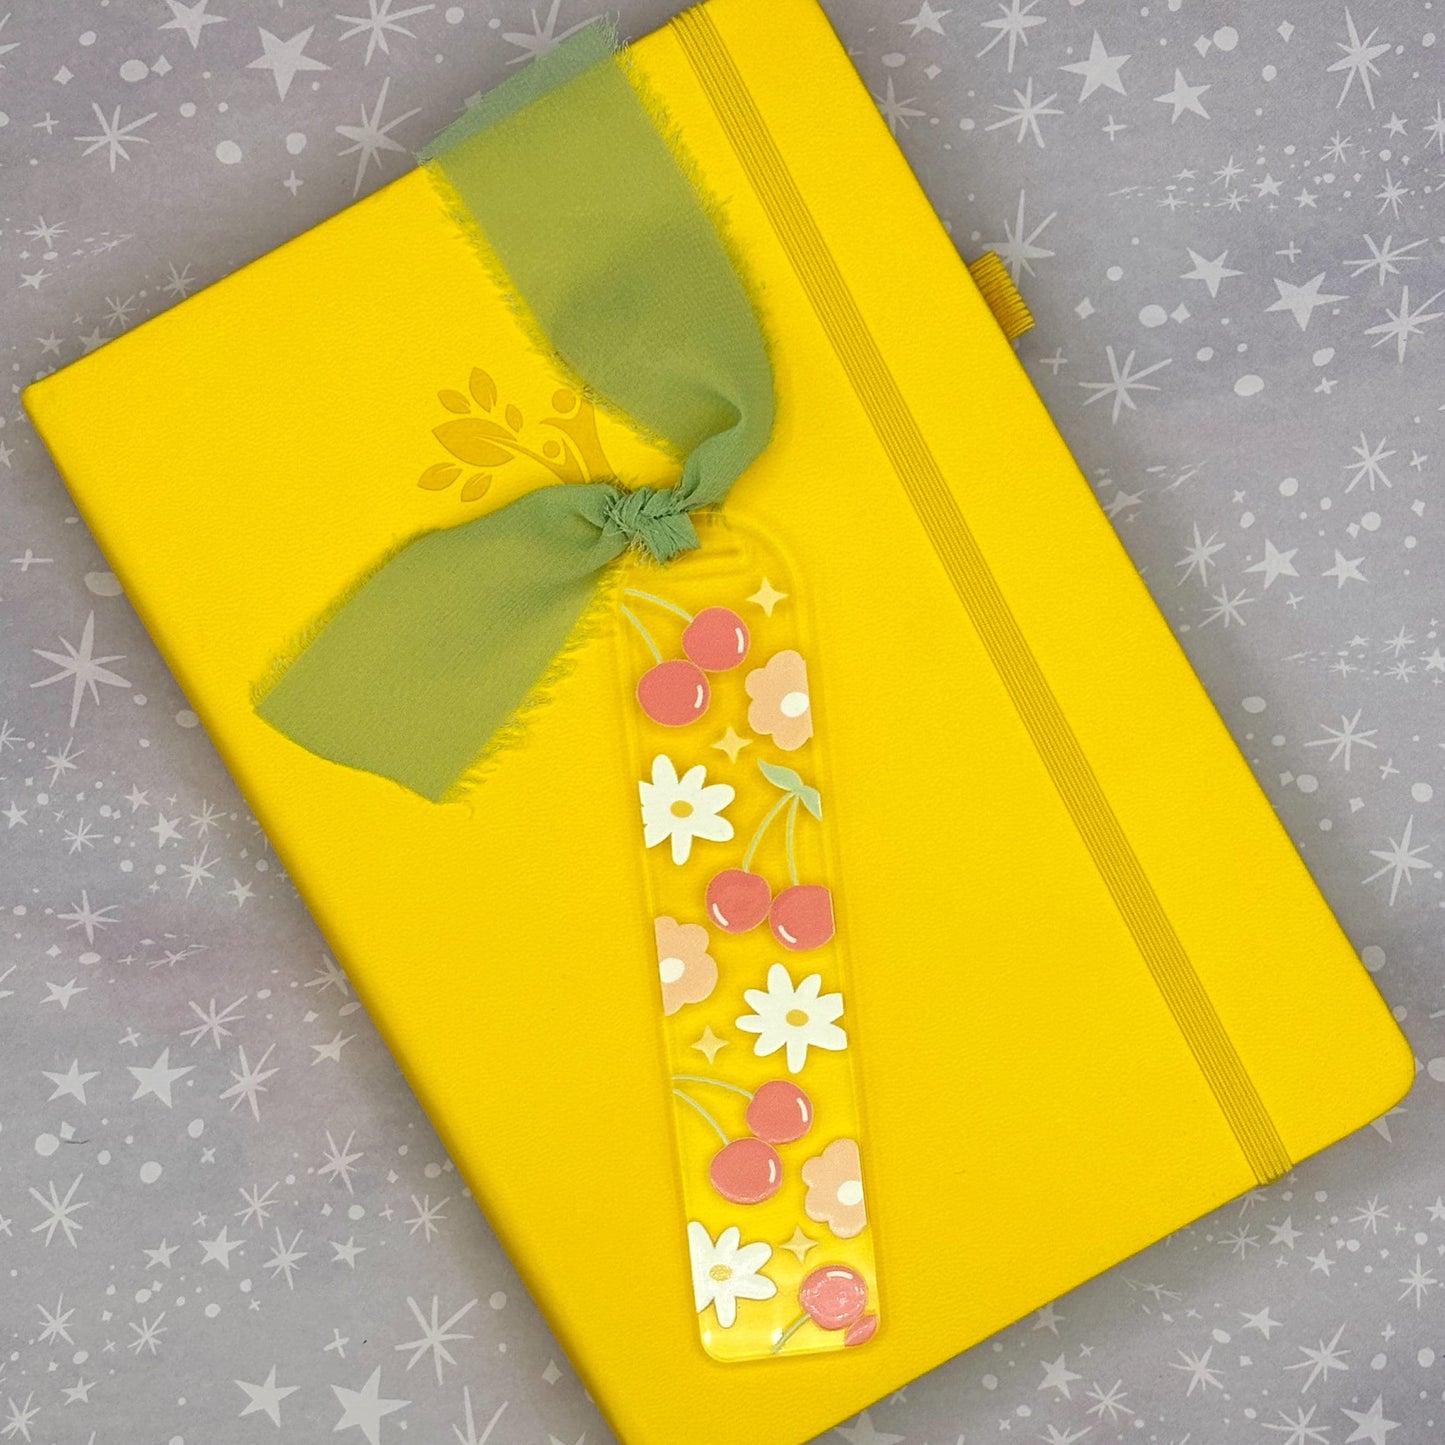 Cherries and Flowers Cute Acrylic Bookmark with Chiffon Ribbon